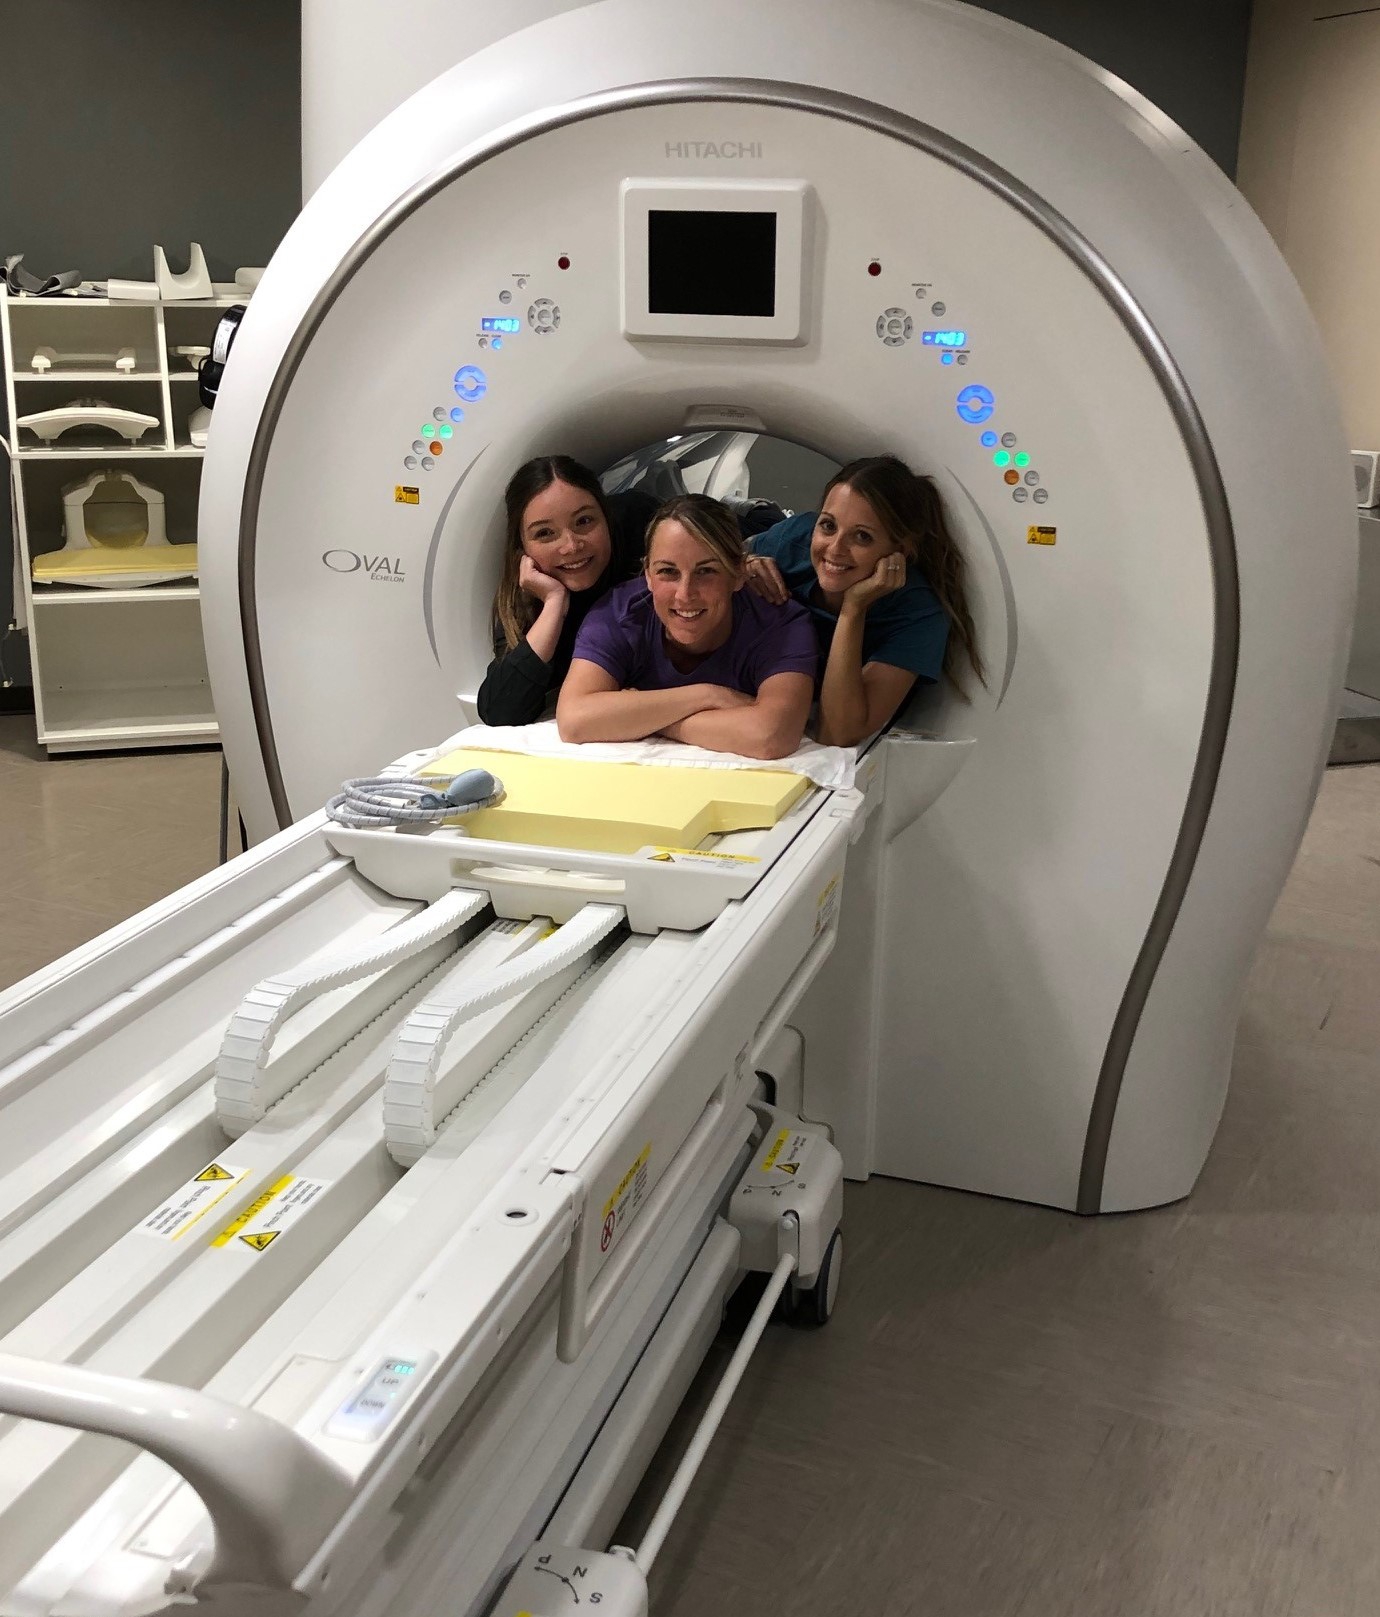 New CHCS MRI offers wide-bore optimal images | Community